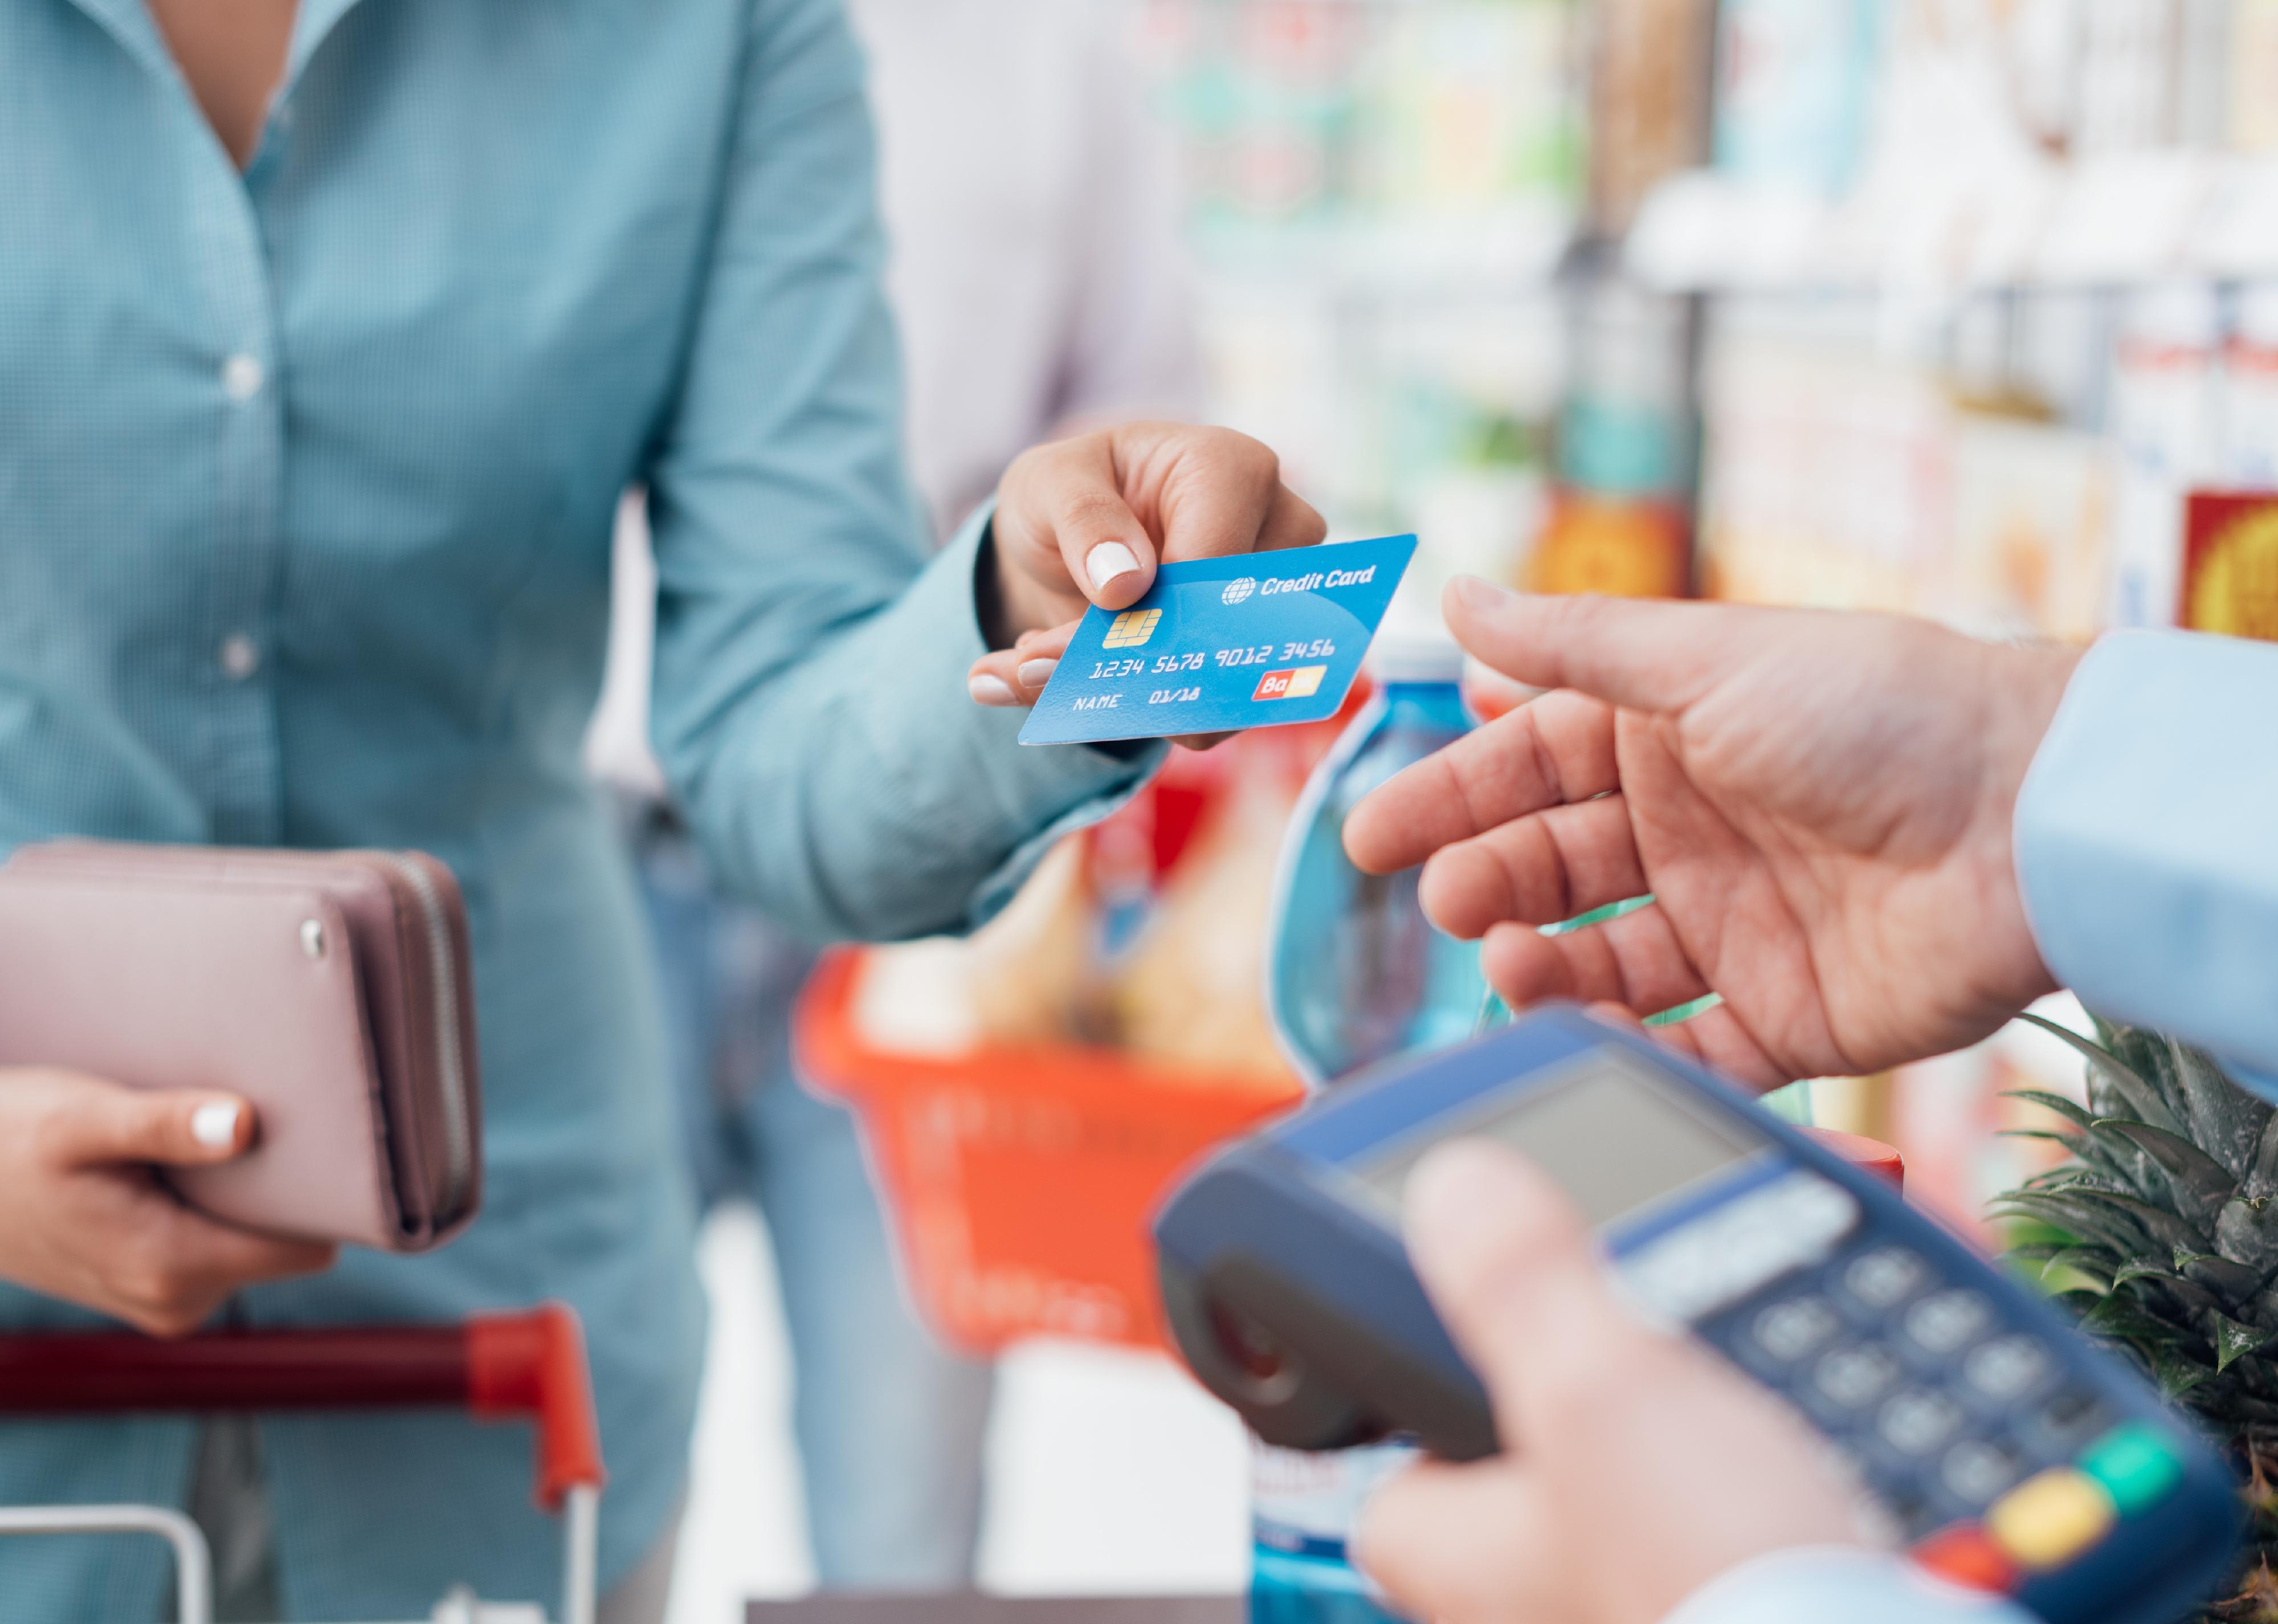 Woman at a supermarket checkout paying using a credit card